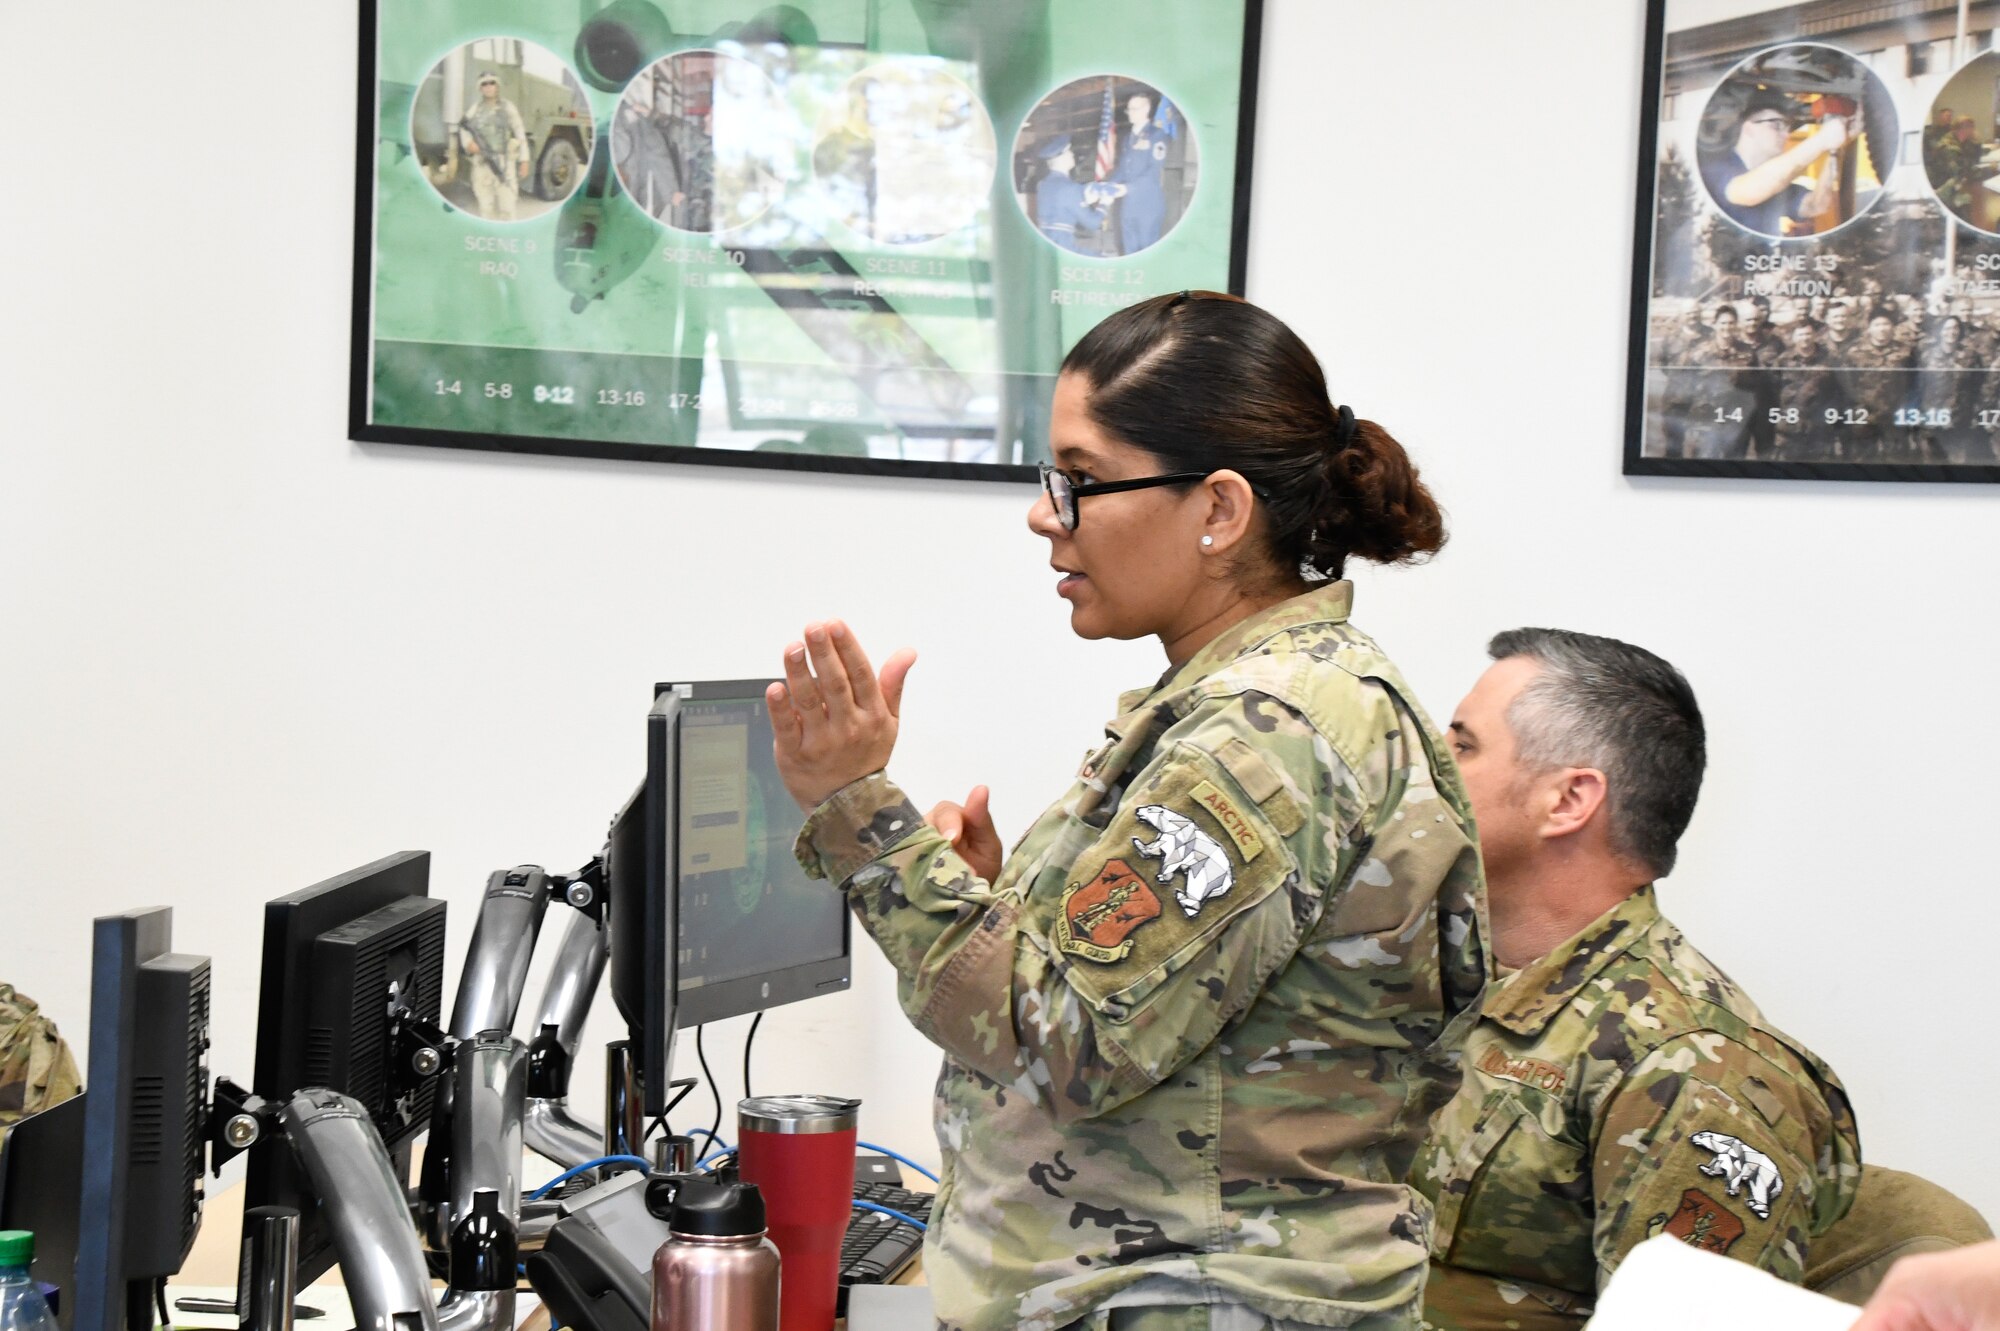 Master Sgt. Jezabelle Oneill, 168th Wing Manpower and Personnel Senior Enlisted Advisor provides operational and accountability updates during an earthquake continuity of operation (COOP) exercise at Eielson Air Force Base, Alaska, May 1-5, 2023. The exercise focused on immediate response efforts to a 9.2 magnitude earthquake and tsunami scenario, including emergency communications to respond to the seismic zone and coordination with local, state, and federal support agencies. The members of the operations center operated during the exercise under the knowledge of public utilities disrupted and widespread infrastructure damage in southern Alaska and coastal communities. (Alaska Air National Guard photo by Senior Master Sgt. Julie Avey)